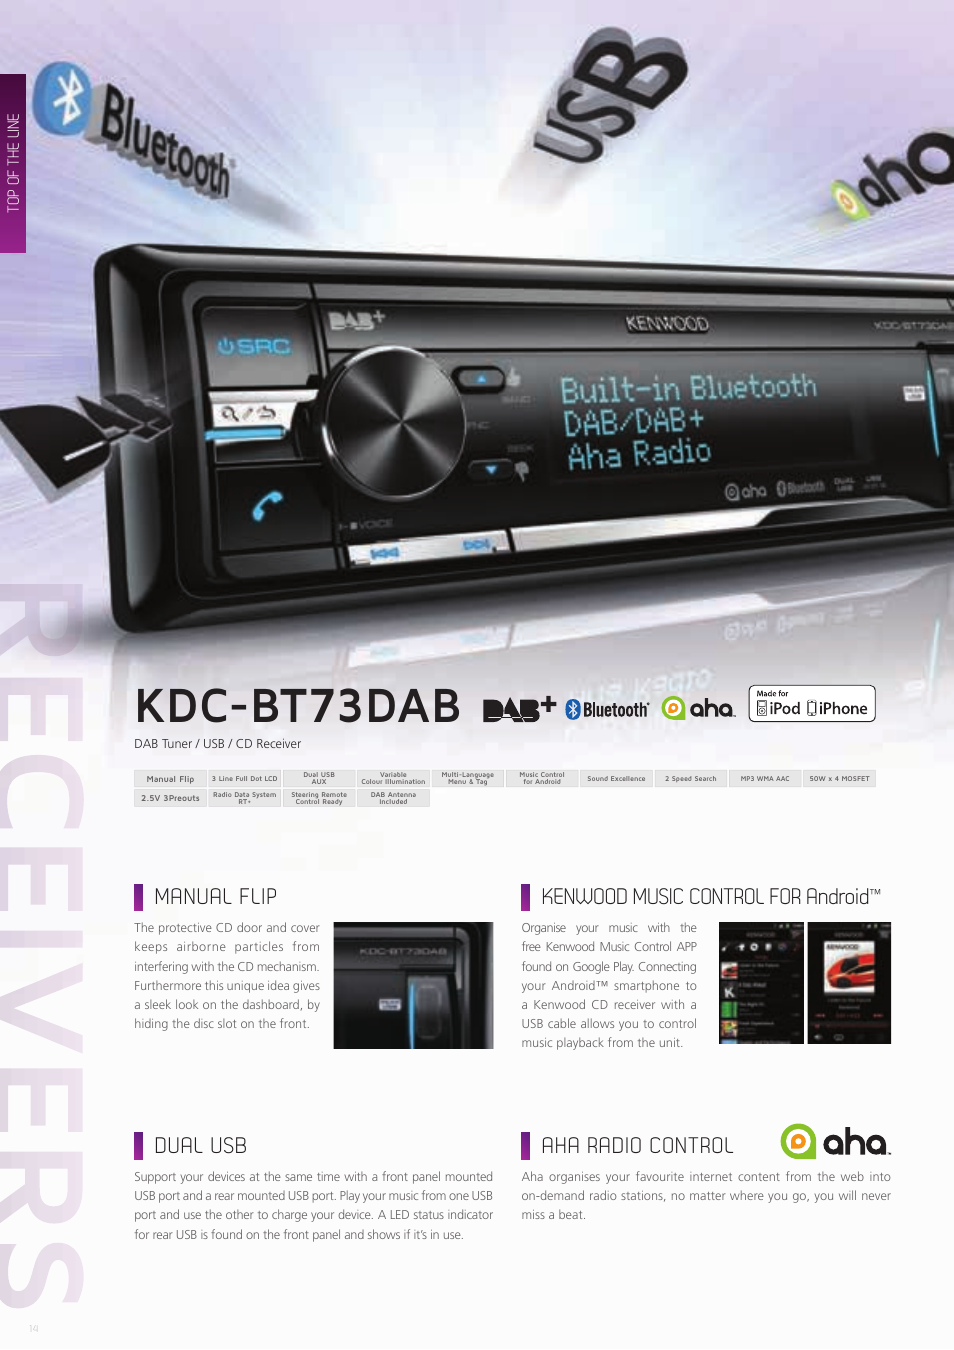 Kdc-bt73dab, Aha radio control, Kenwood music control for android | Kenwood  CAW-CKIMVW1 User Manual | Page 14 / 36